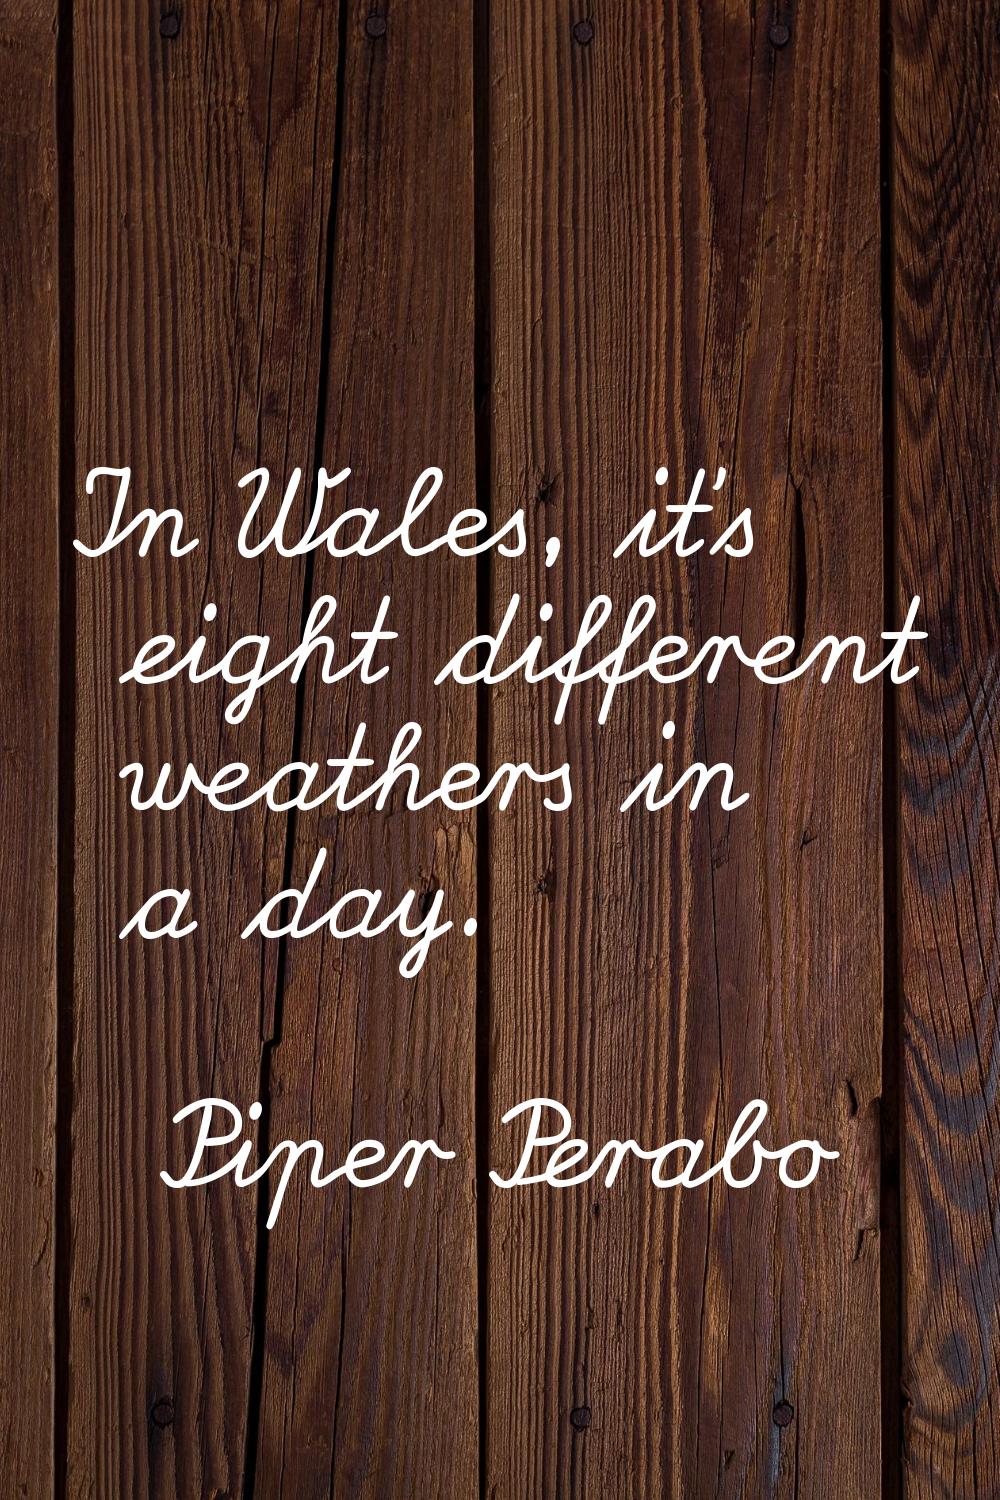 In Wales, it's eight different weathers in a day.